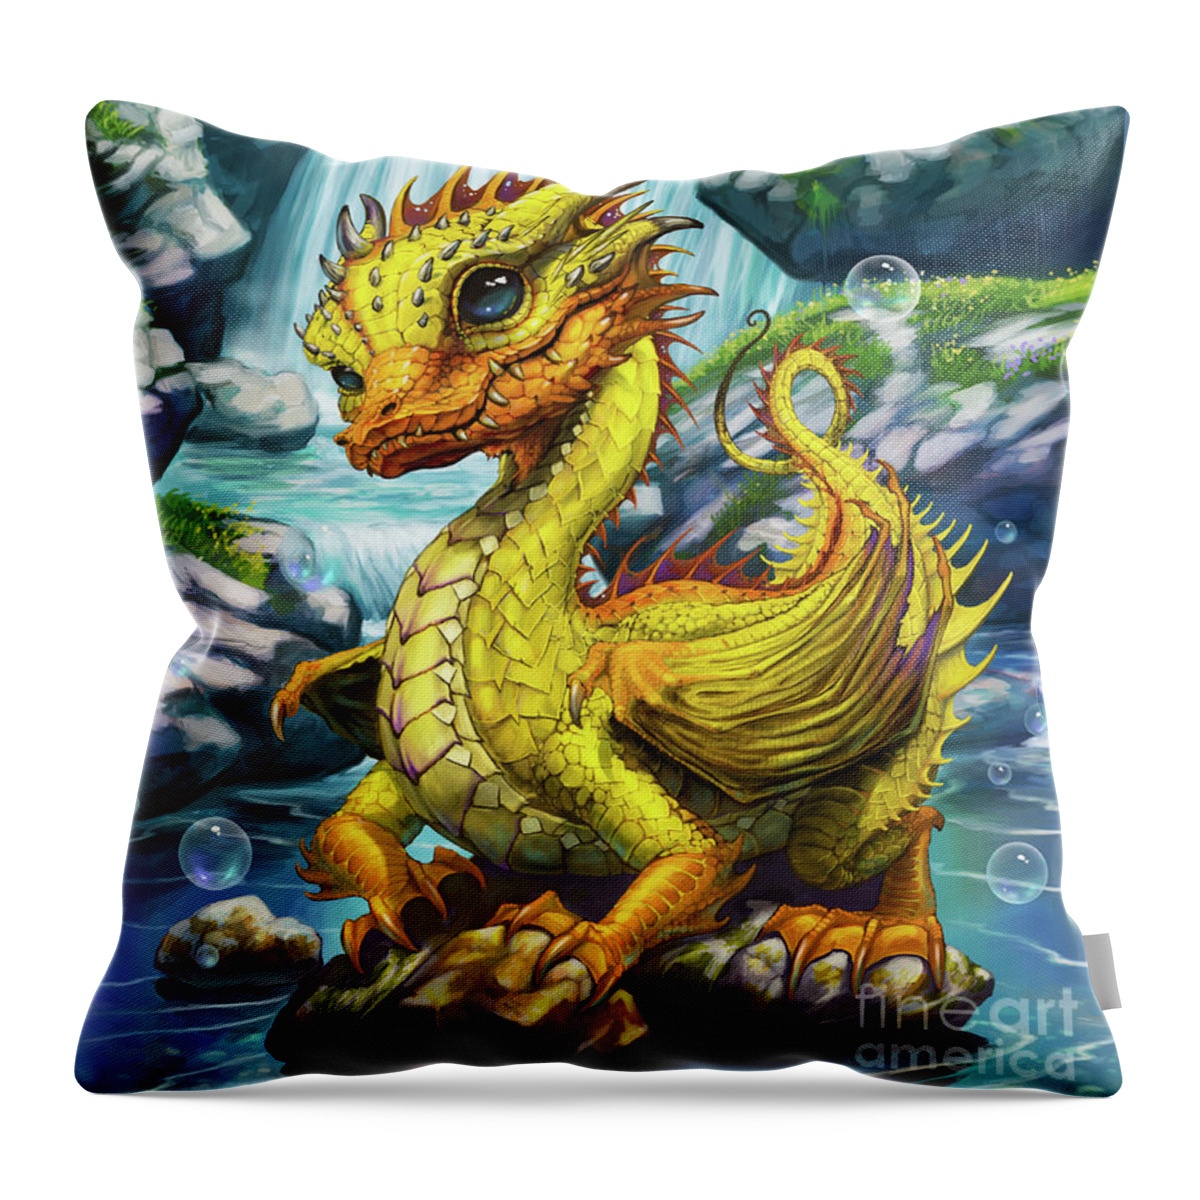 Rubber Ducky Throw Pillow featuring the digital art Rubber Ducky Dragon by Stanley Morrison